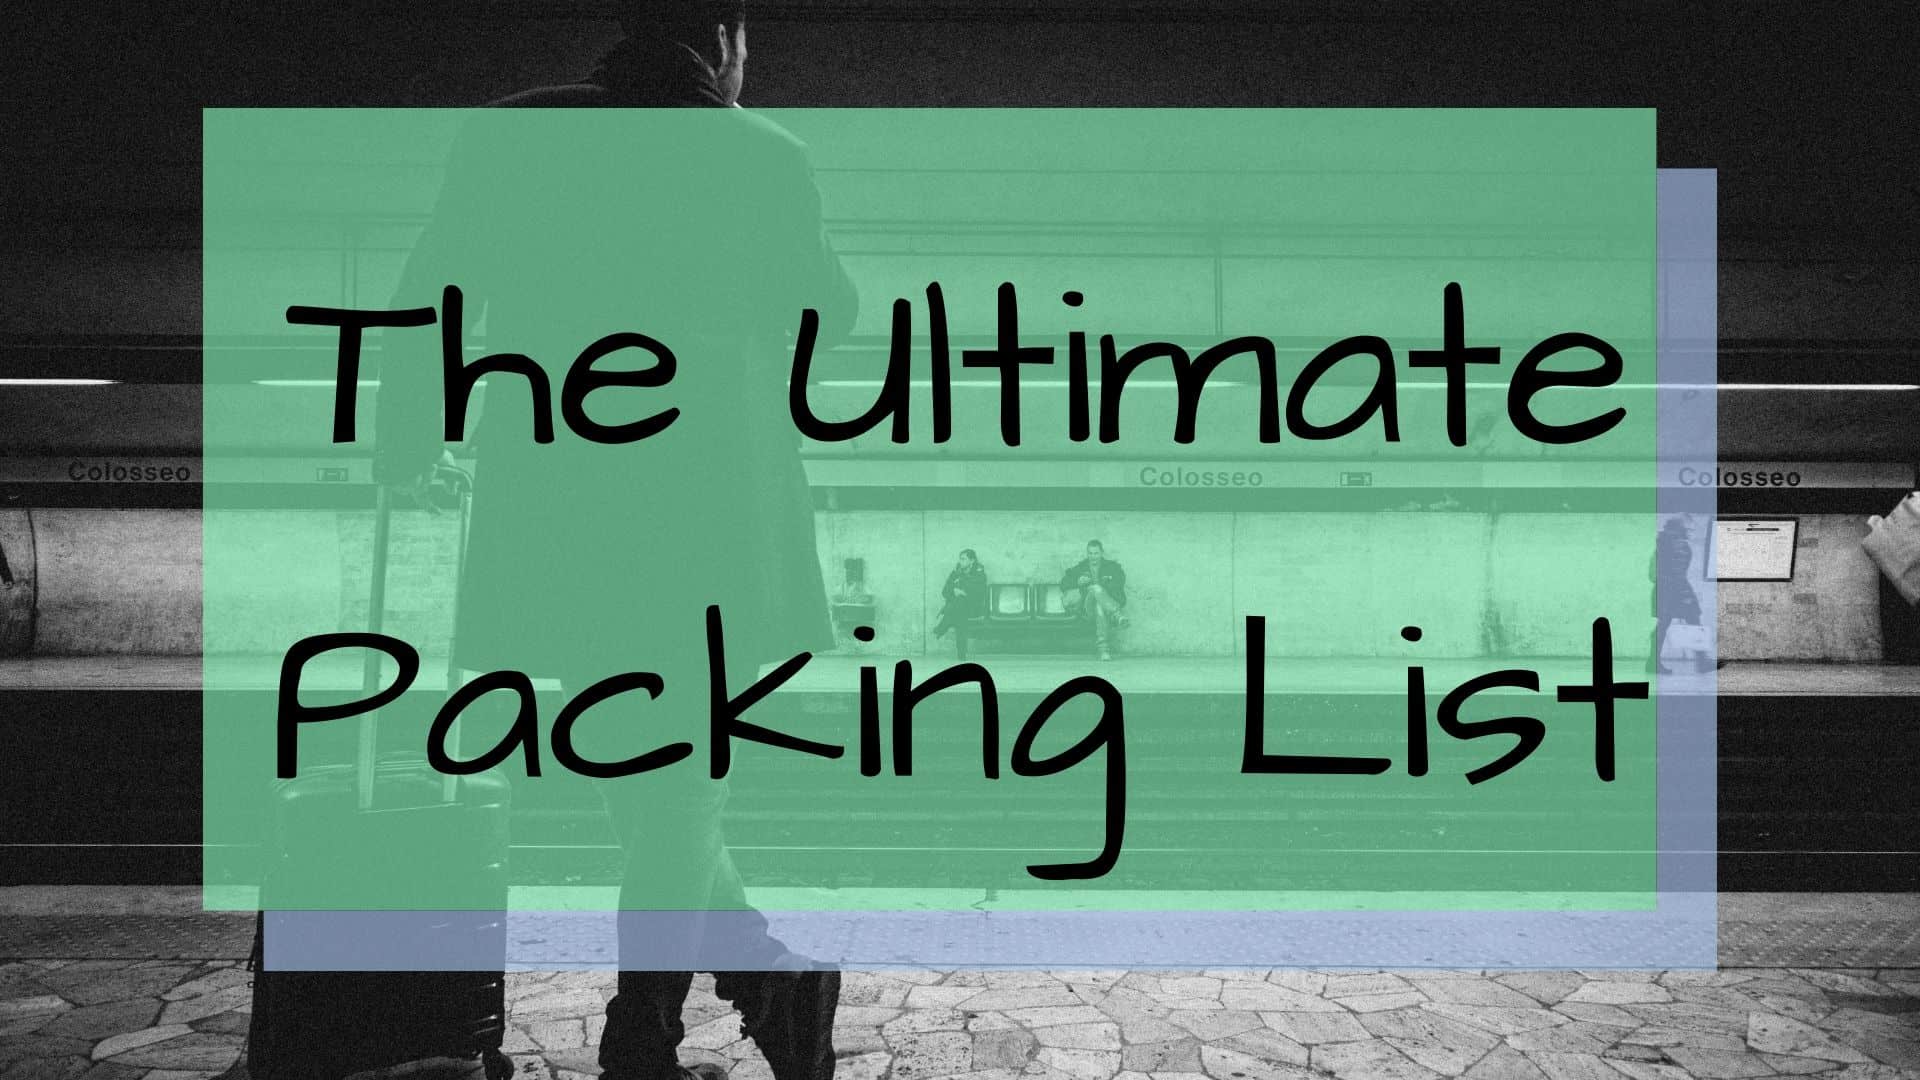 The Ultimate Packing List